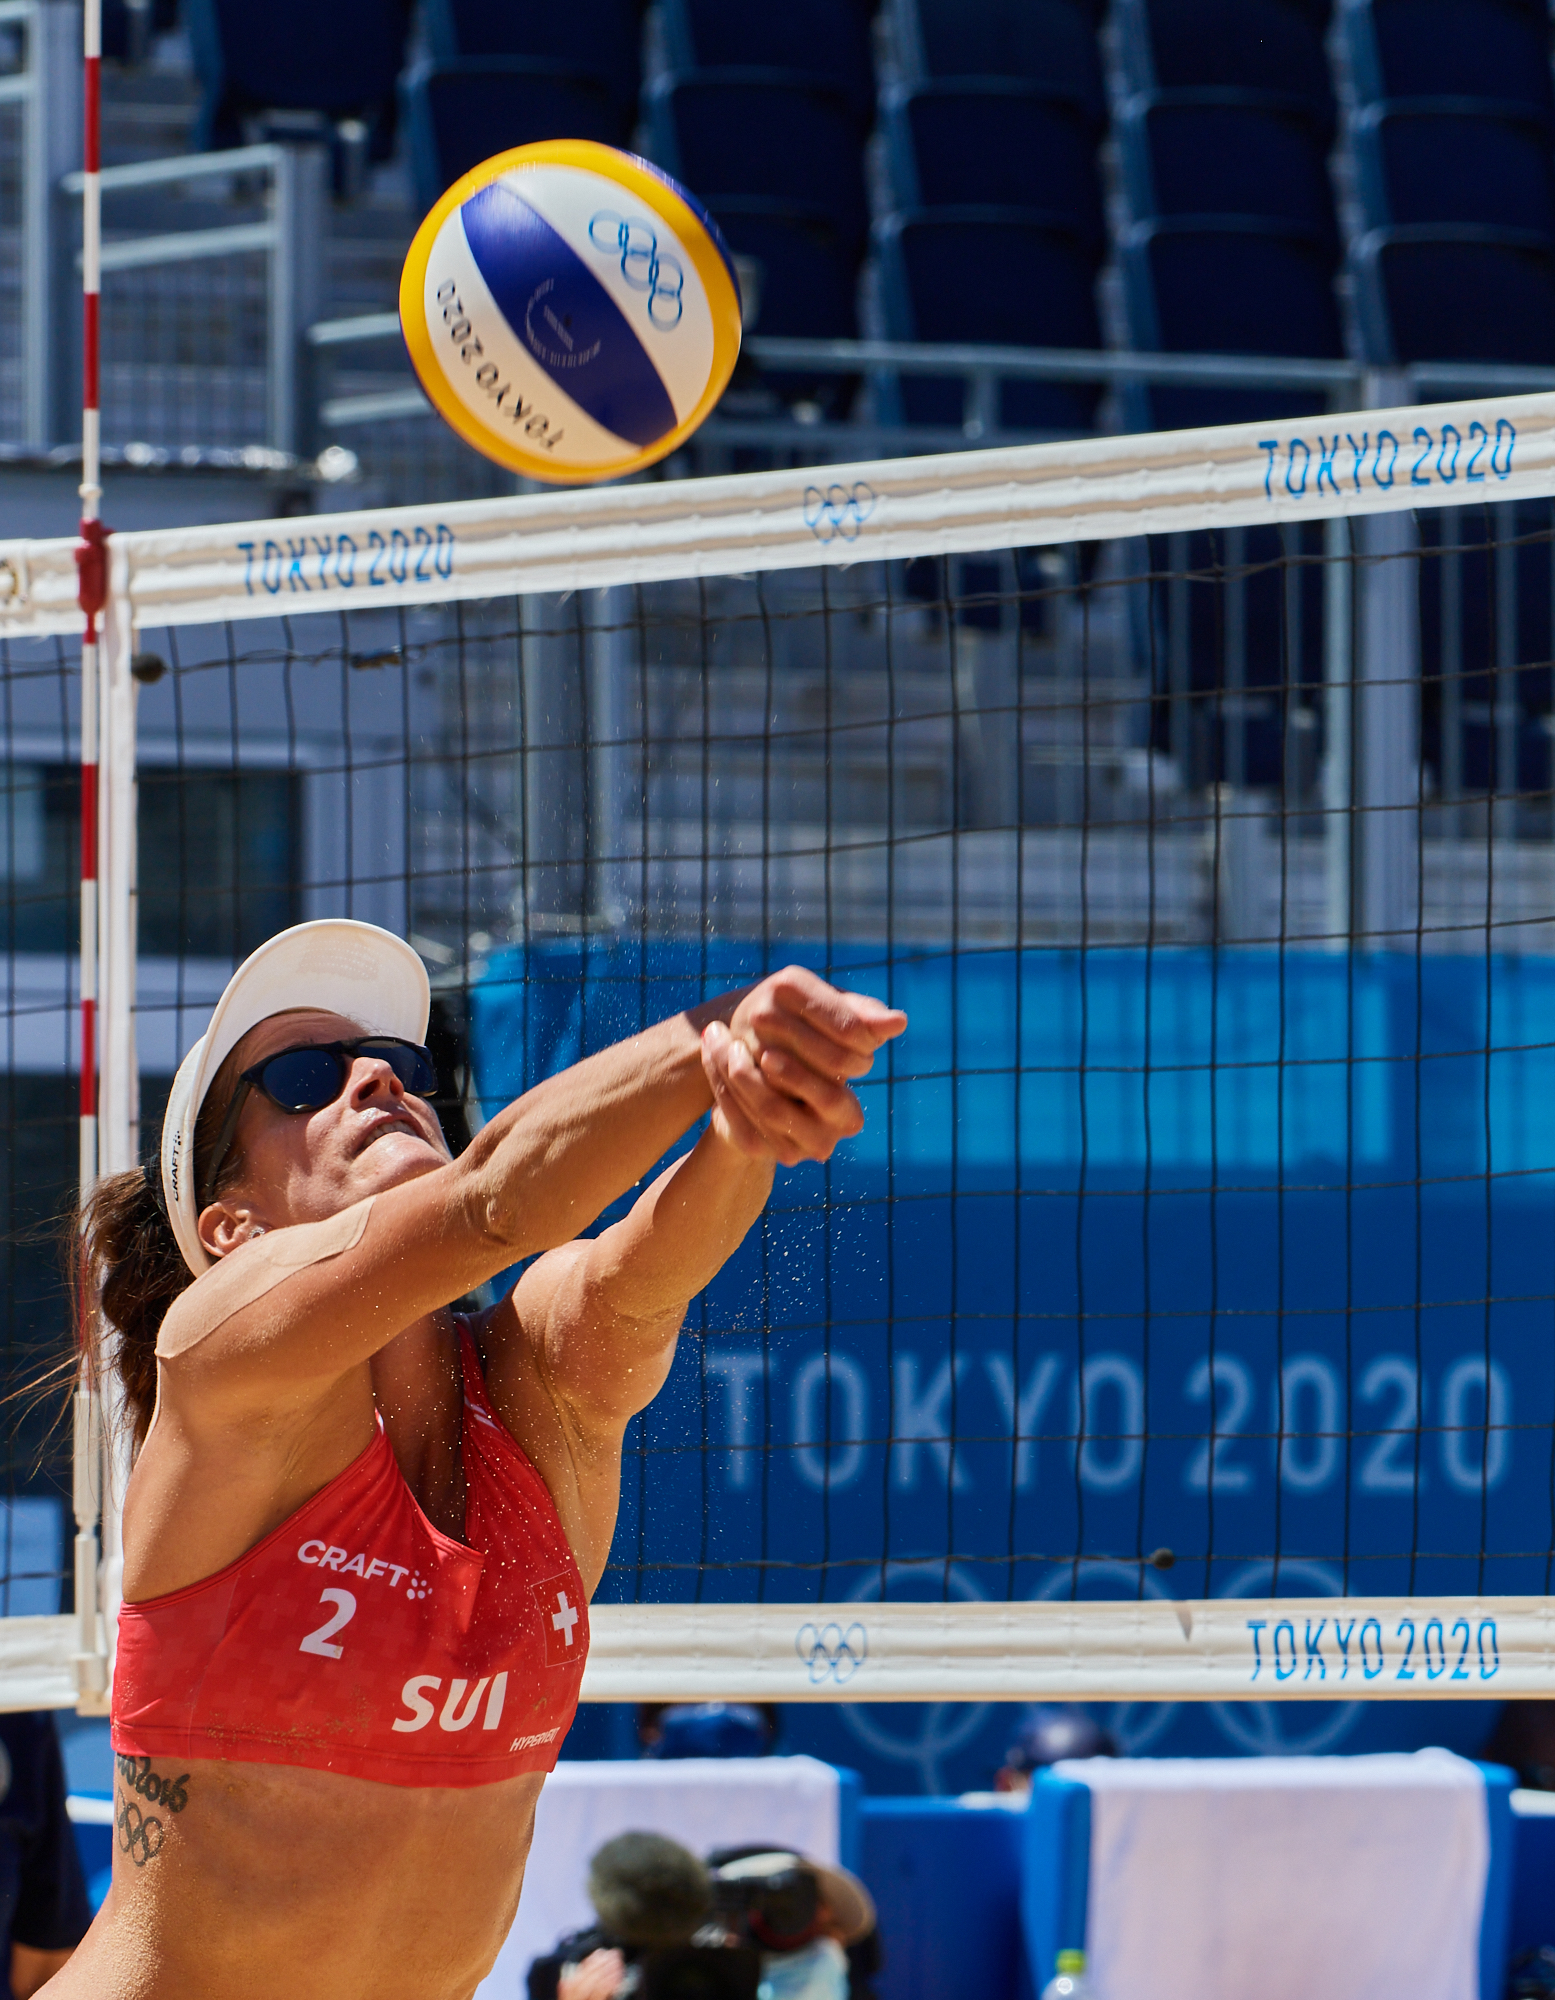 Photograph of Joana Heidrich from Team Switzerland at the bronze medal match for the women's beach volleyball competition during the Tokyo 2020 Olympics.